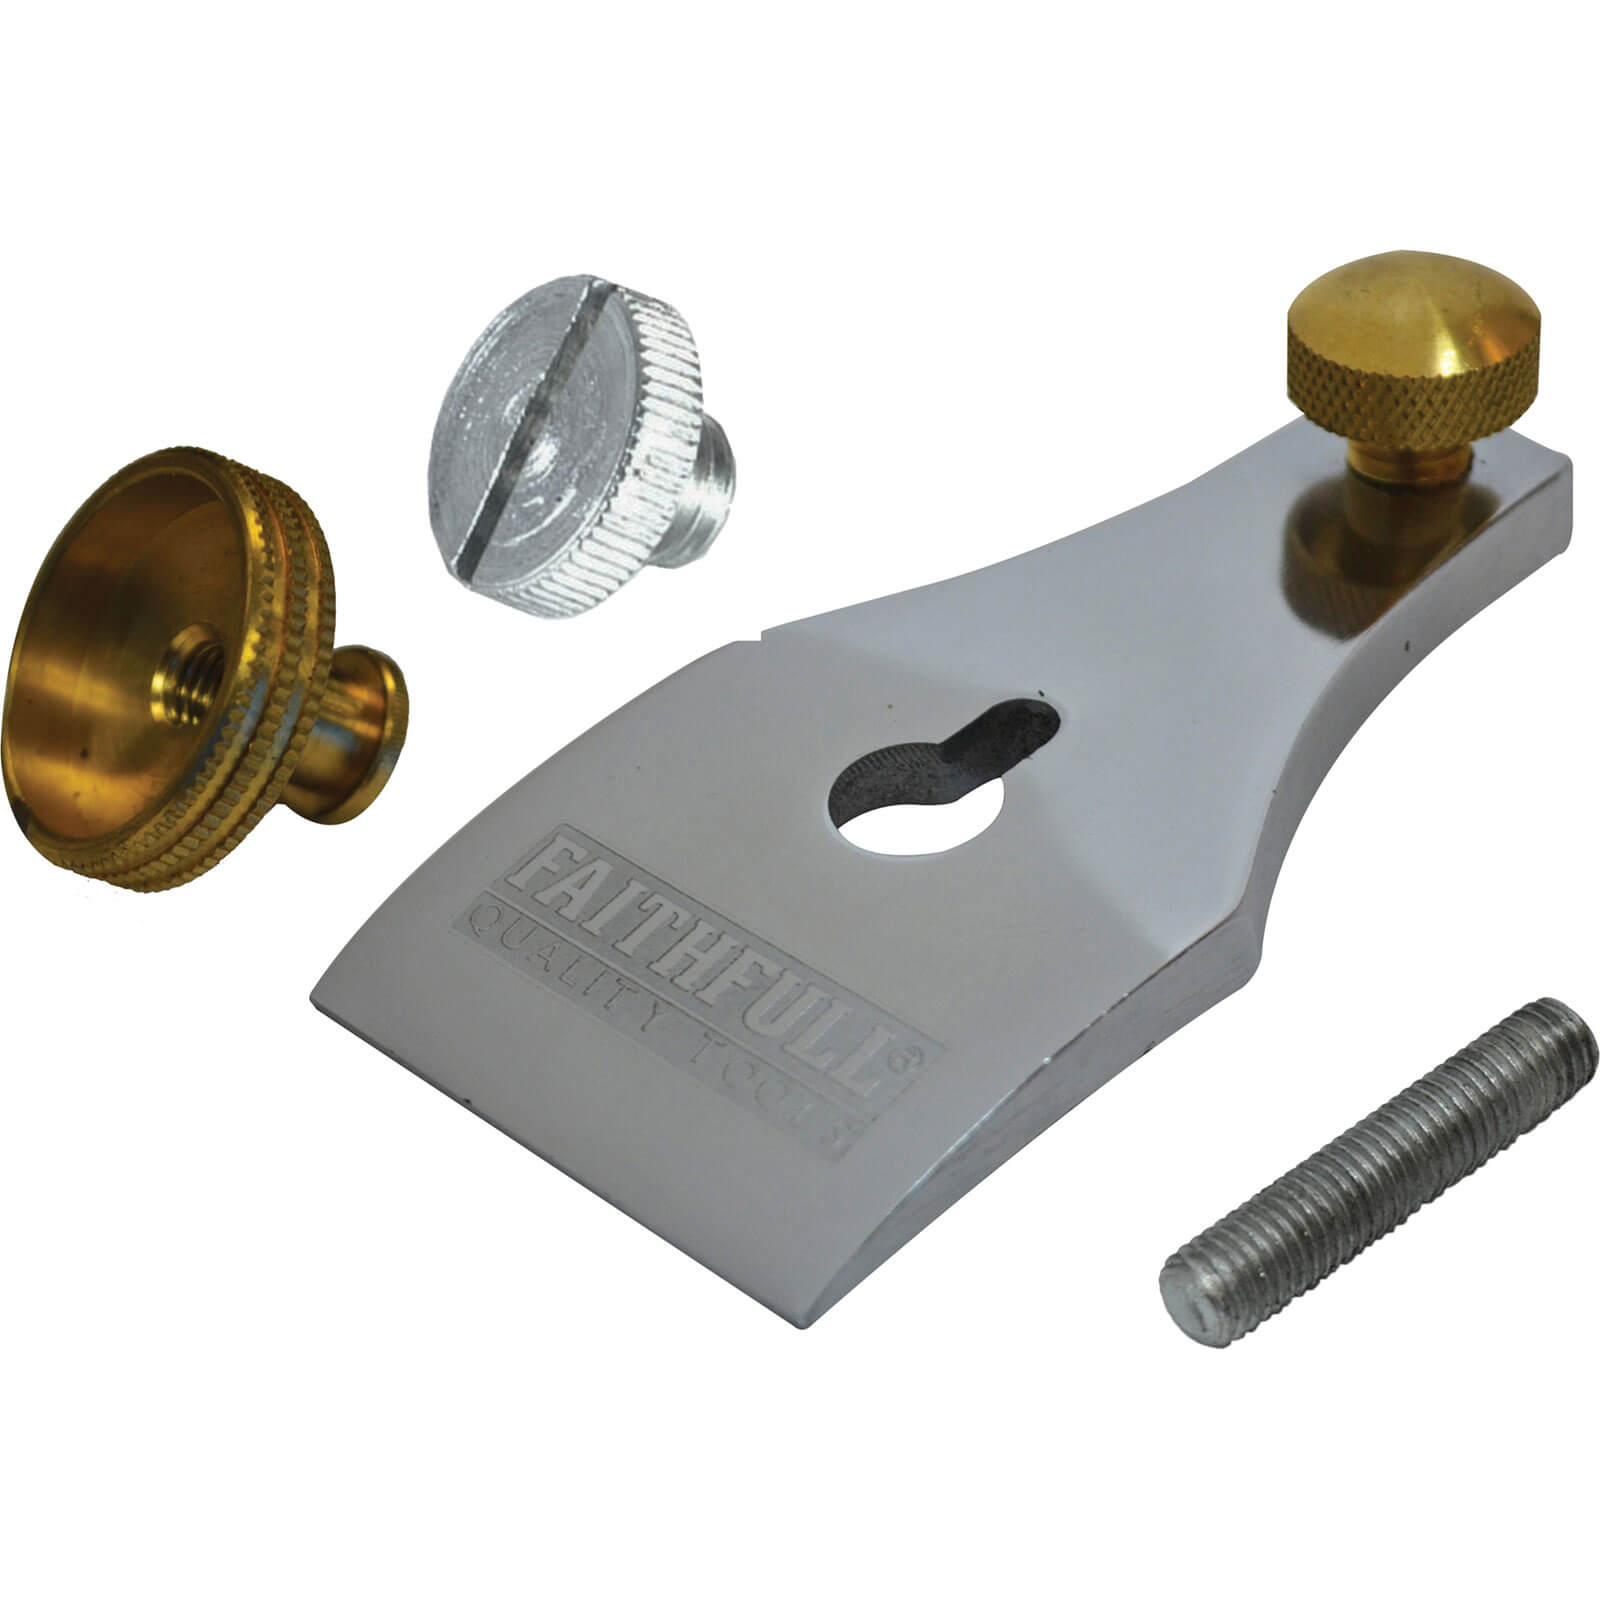 Image of Faithfull Lever Cap, Adjuster Nut and Screws For No 4 and 5 Planes